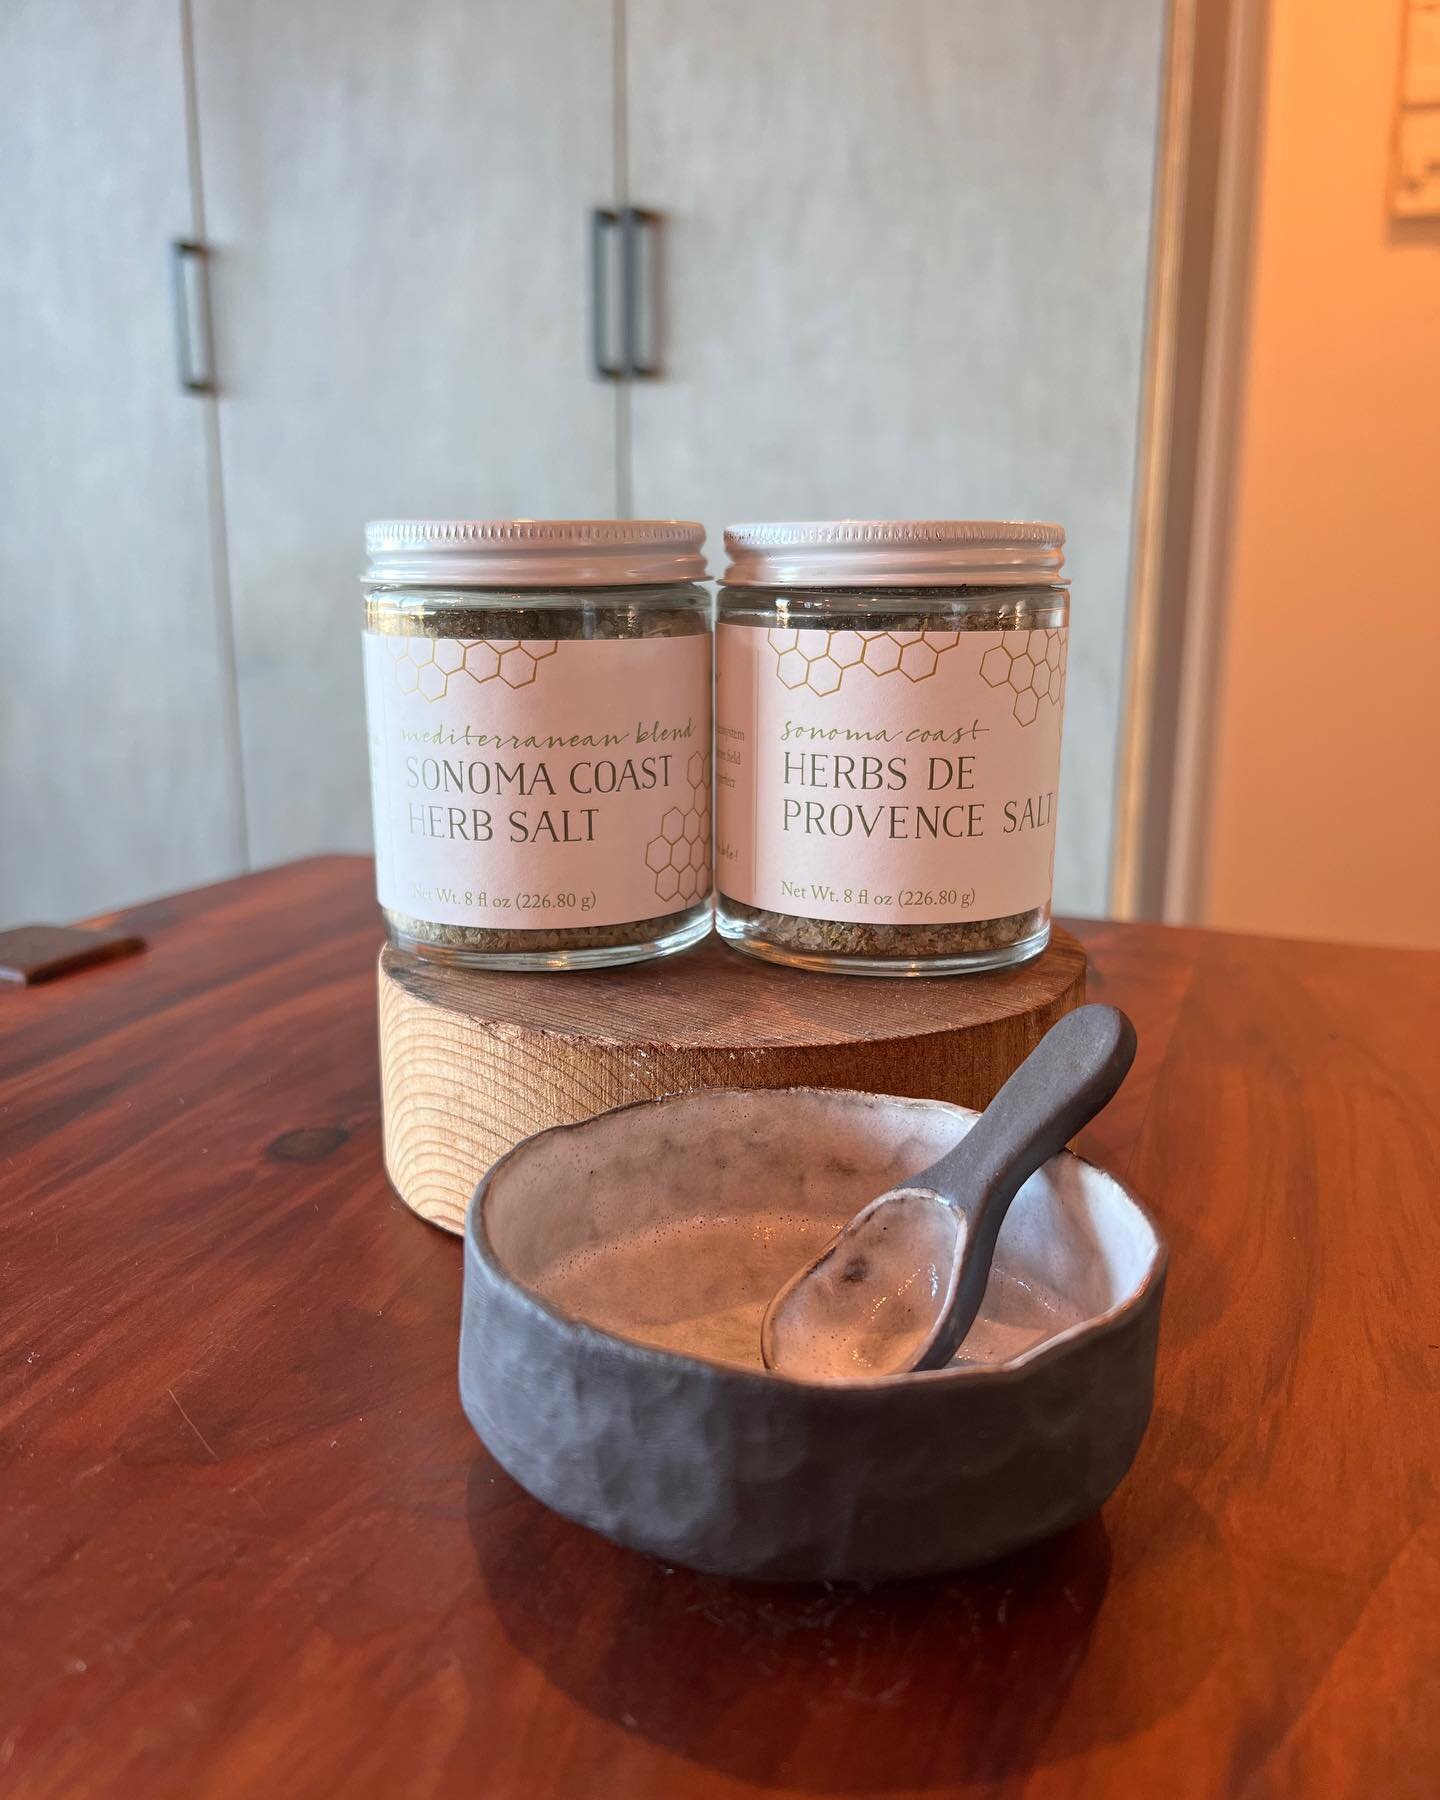 Two salts and a cellar, ready to ship! We have 5 farm boxes to choose from in our shop and the links are now working! #gift #herbsalt #ceramics #landstewardship